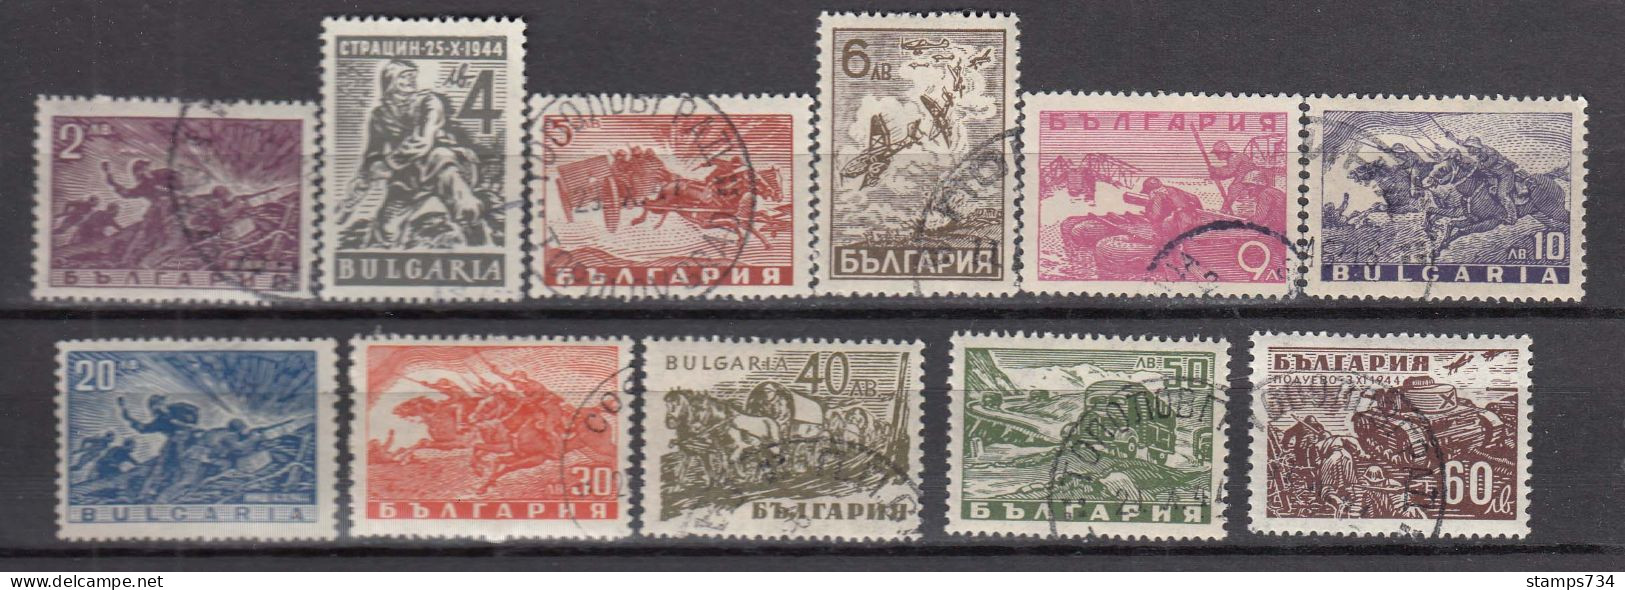 Bulgaria 1946 - Serie "Guerre Et Patrie", YT 478/88, Used - Usados